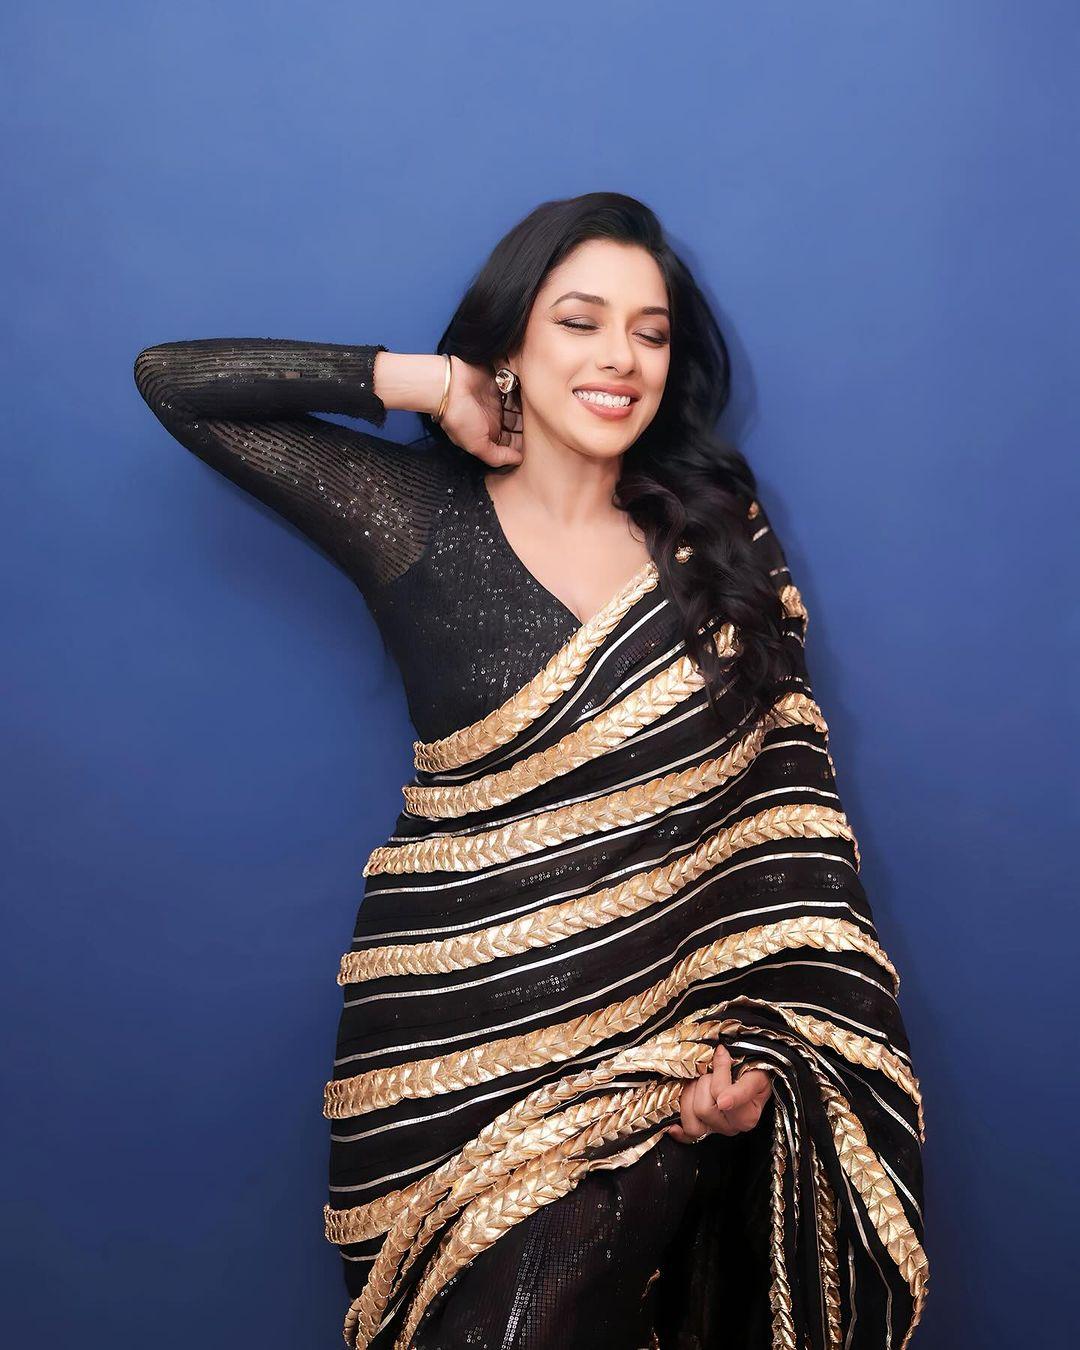 Once again, Rupali nailed another beautiful appearance like a queen. In this golden and black saree, she looked regal